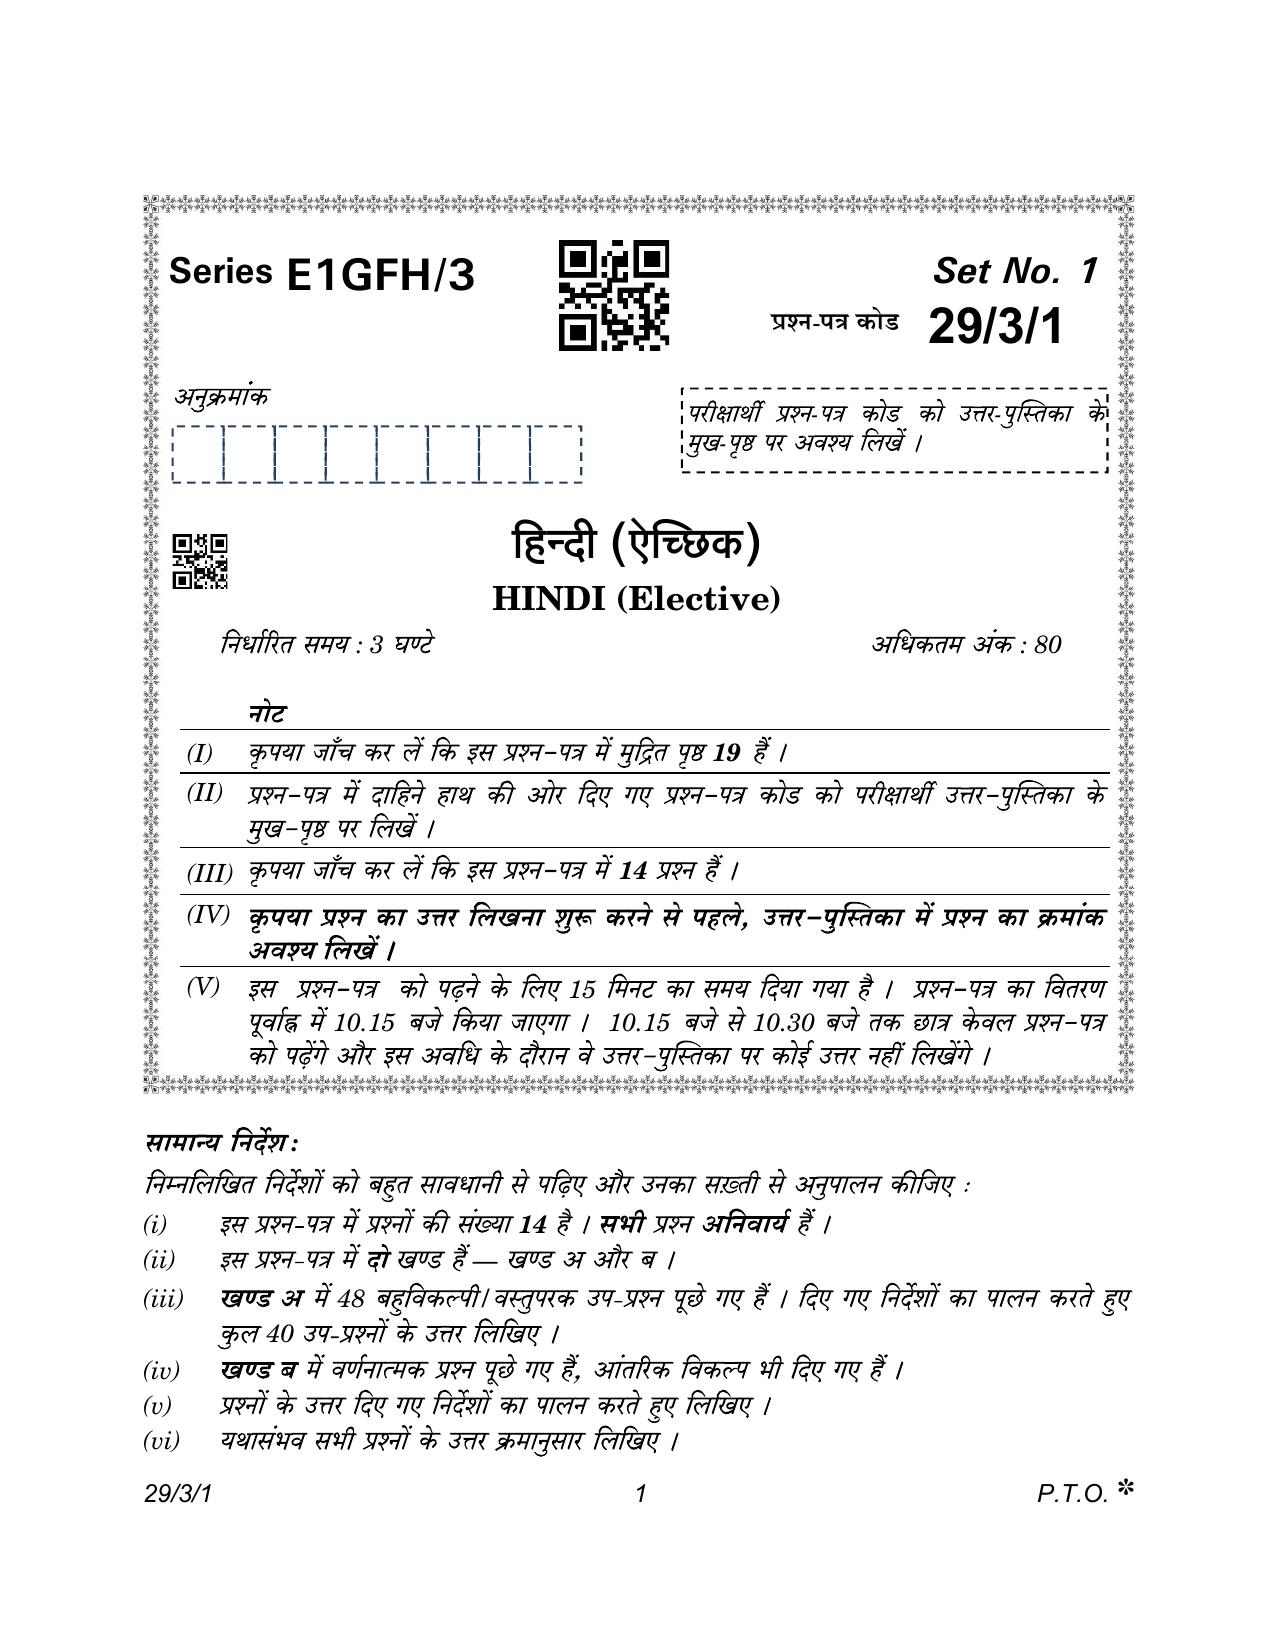 CBSE Class 12 29-3-1 Hindi Elective 2023 Question Paper - Page 1